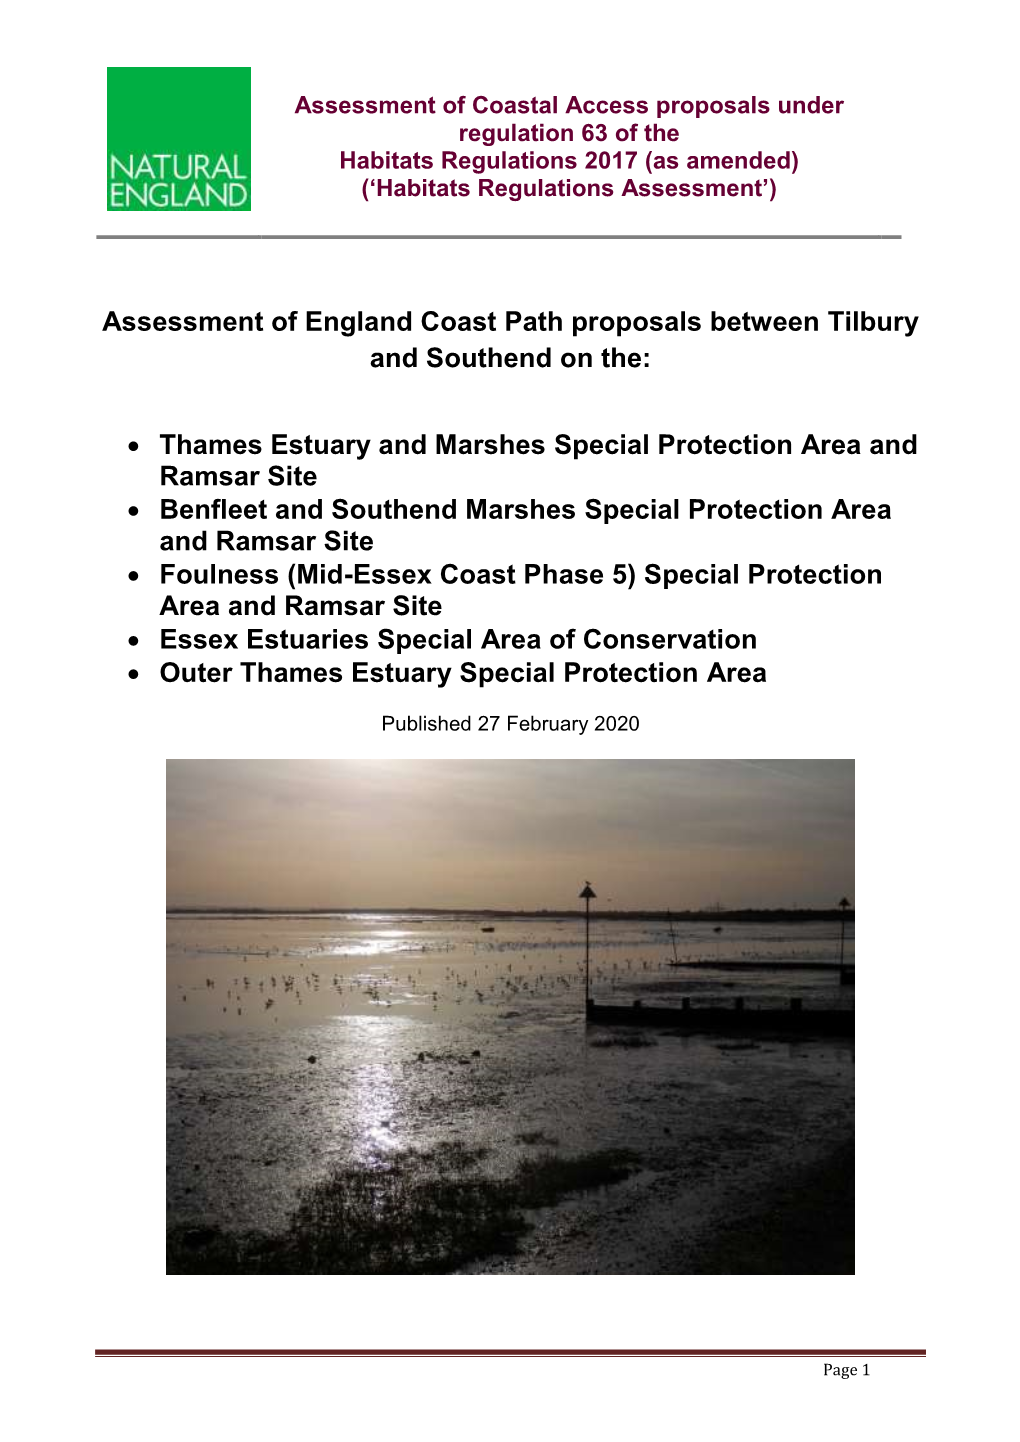 Assessment of England Coast Path Proposals Between Tilbury and Southend on The